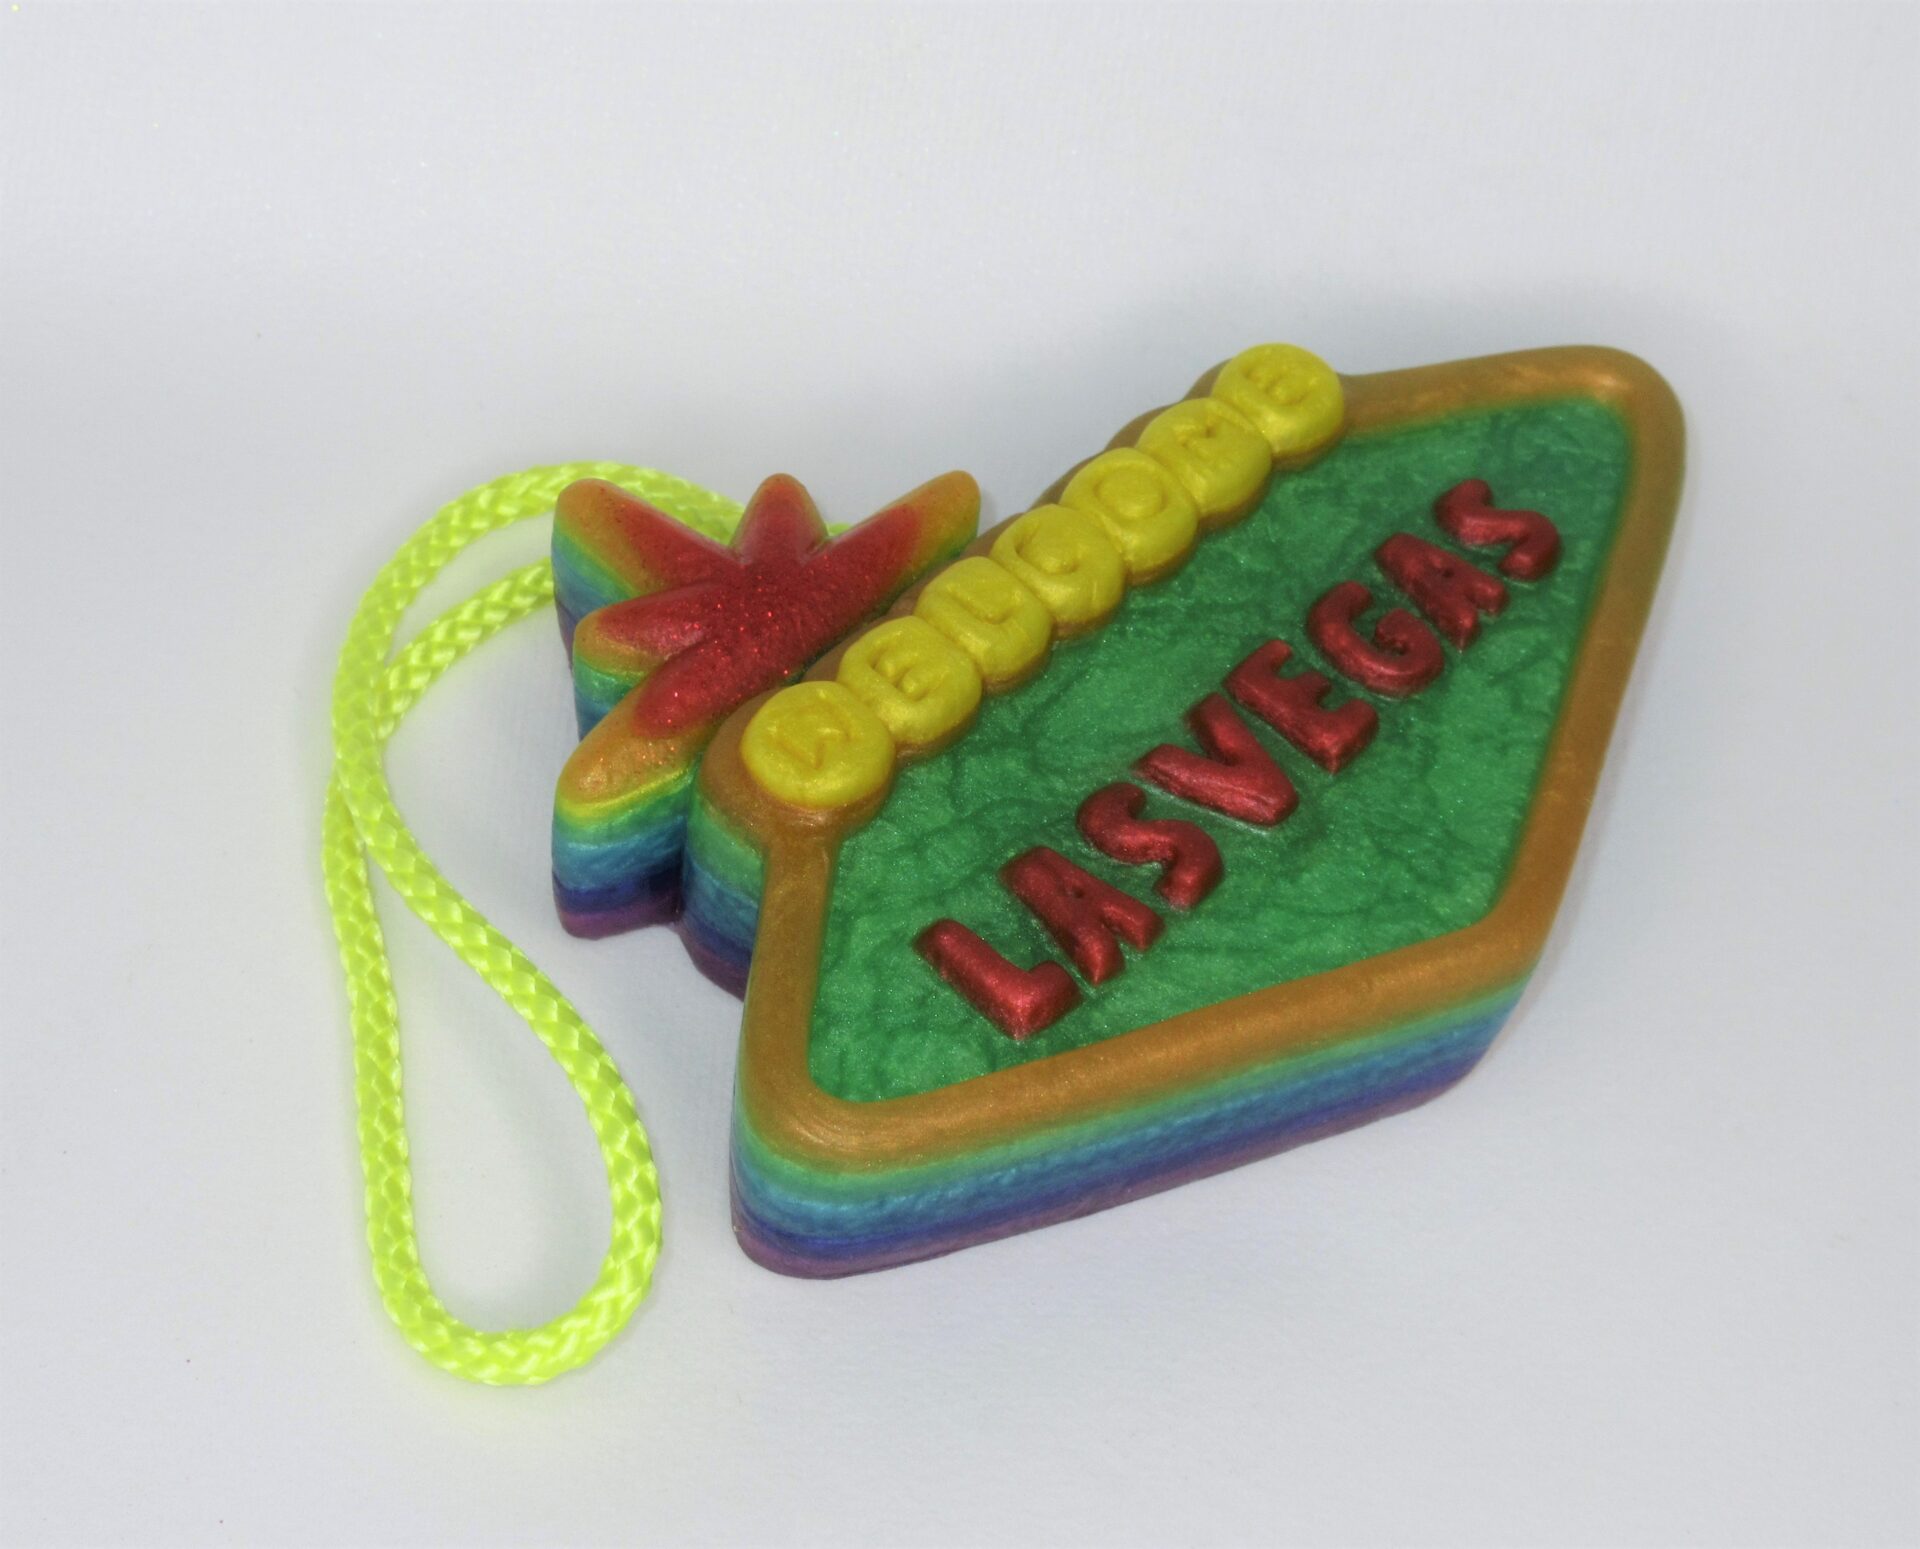 A colorful las vegas sign ornament with a yellow string.